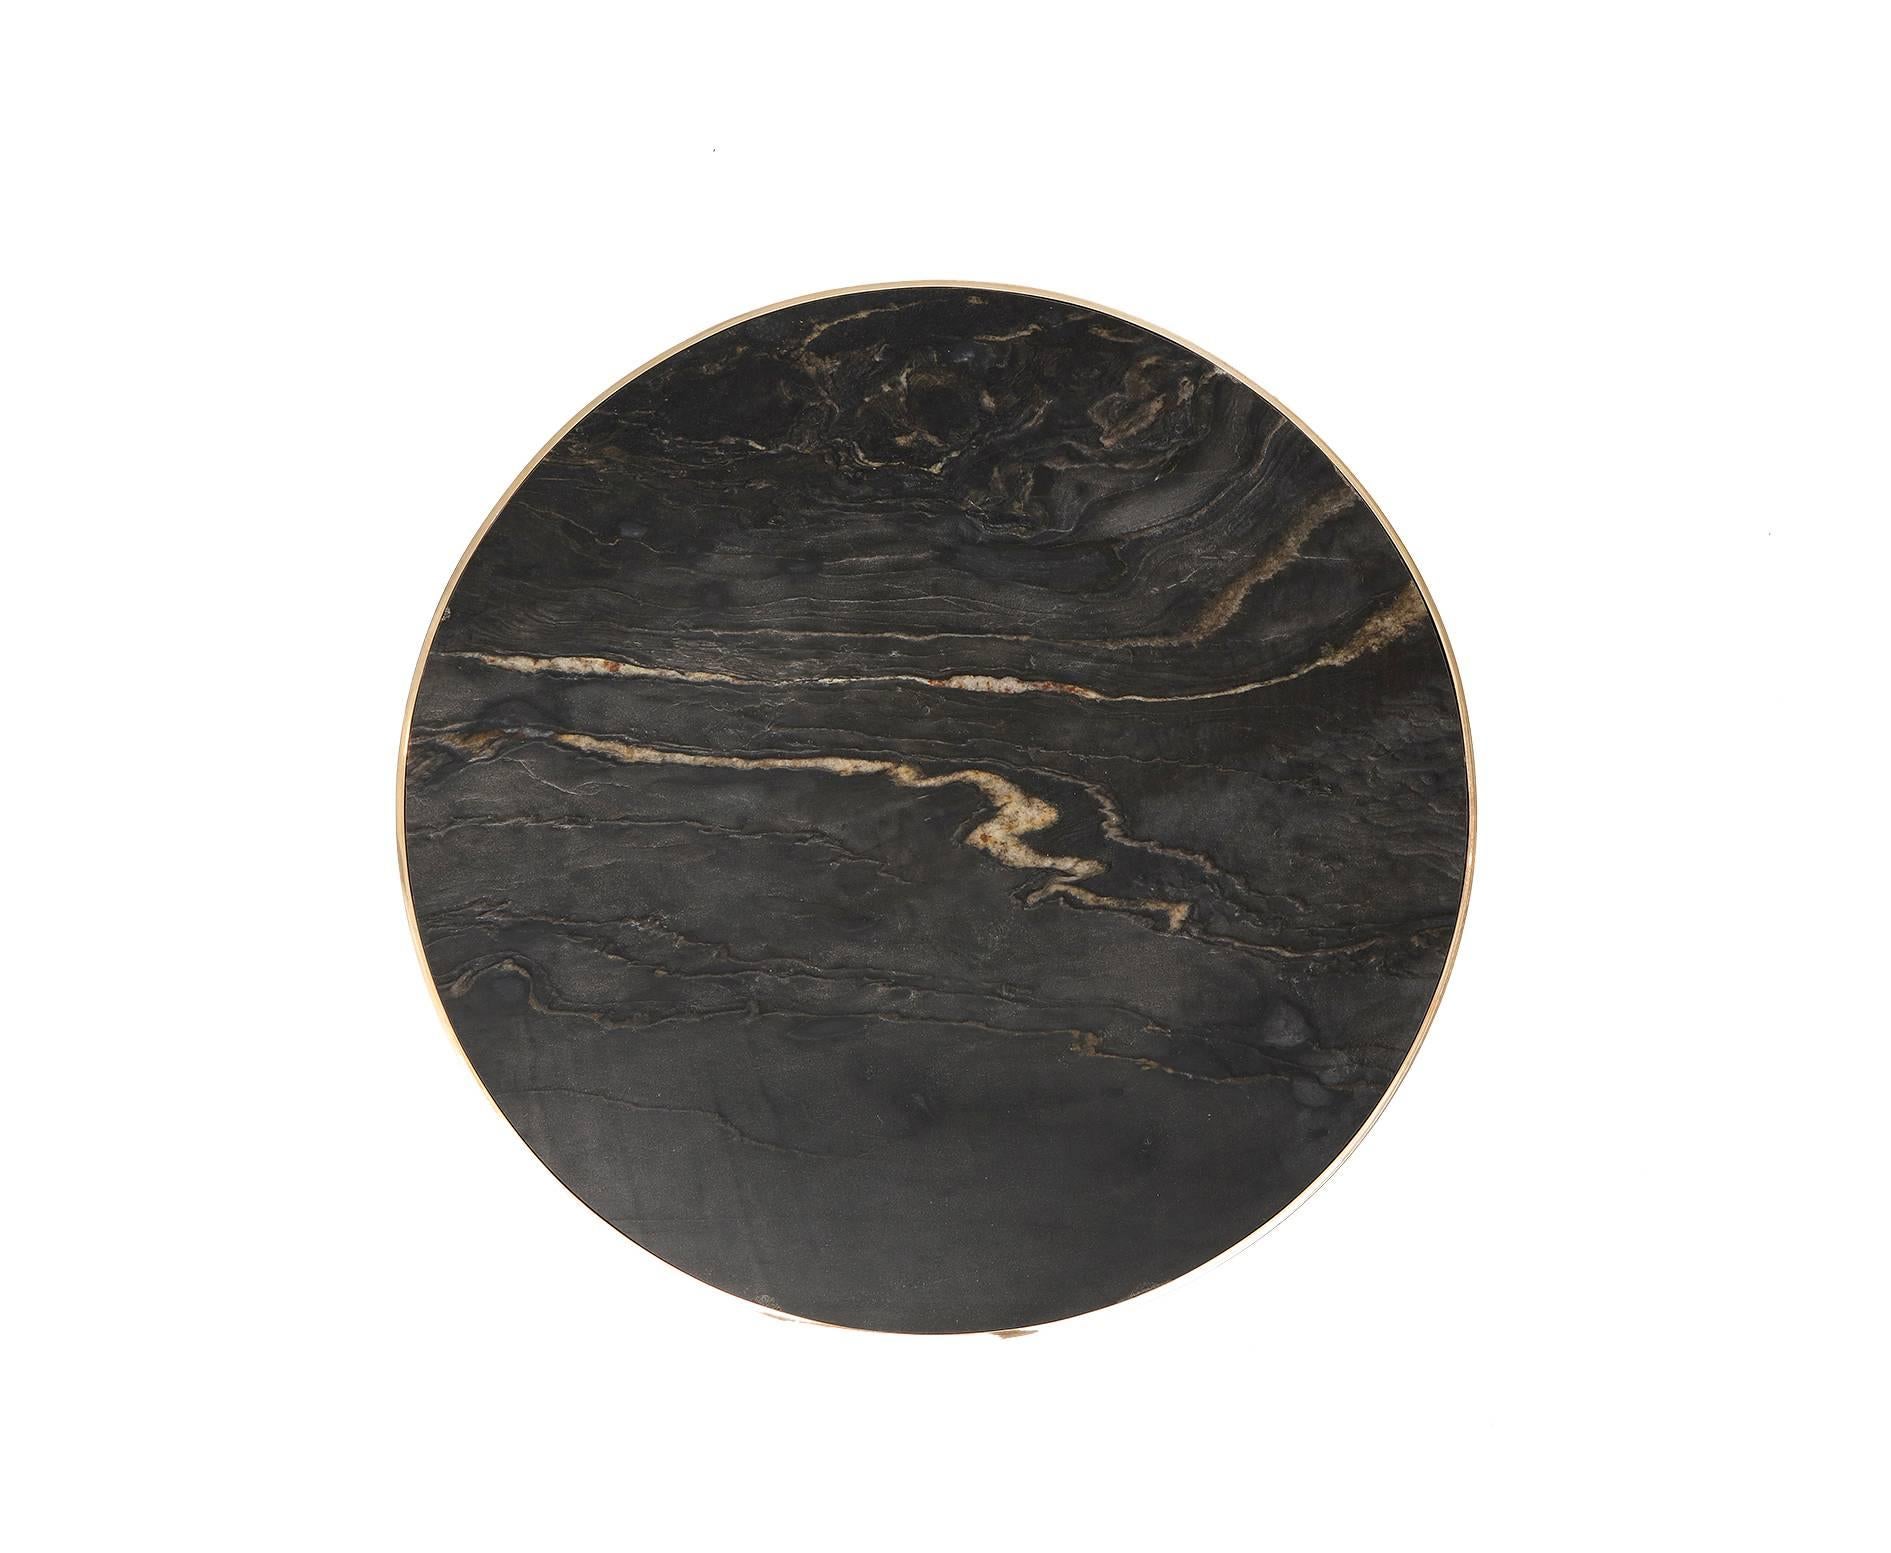 Fine contemporary table by Studio Gallet. 
Hand-hammered polished bronze + Classic black marble with textured leather finish.
Each piece is handmade in New-York.
Limited edition of 50 pieces.
Custom size available within two weeks.